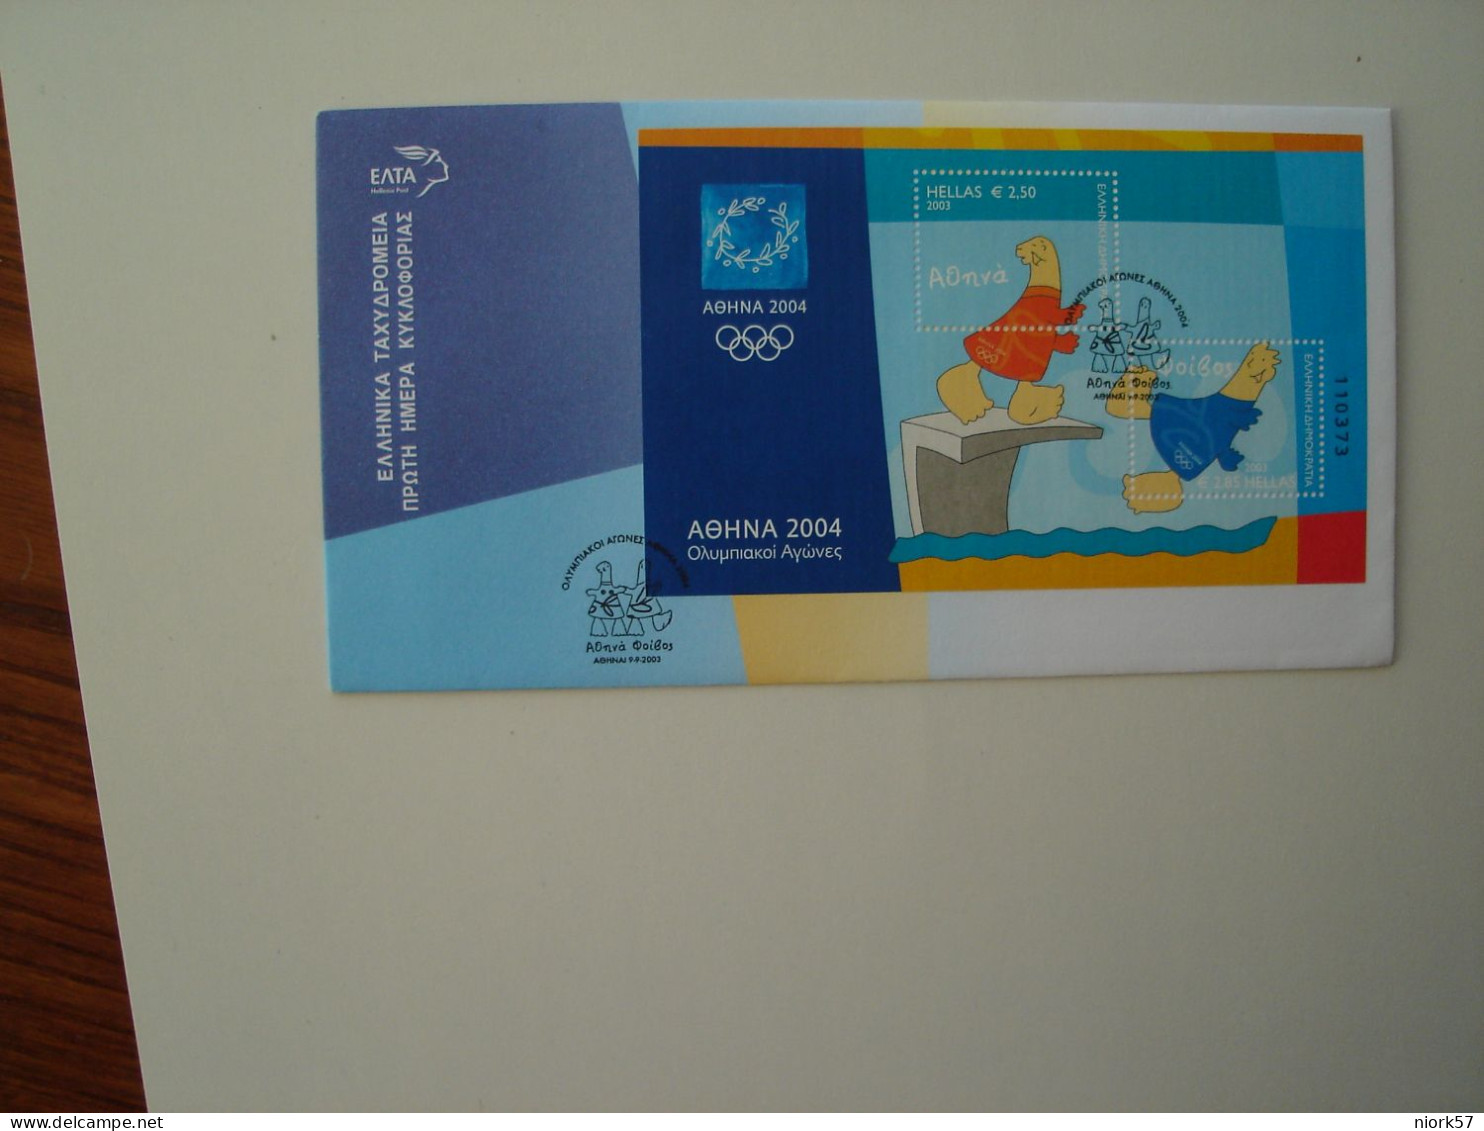 GREECE  MNH   STAMPS SHEET OLYMPIC FLAME  OLYMPIC GAMES ATHENS 2004 - Summer 2004: Athens